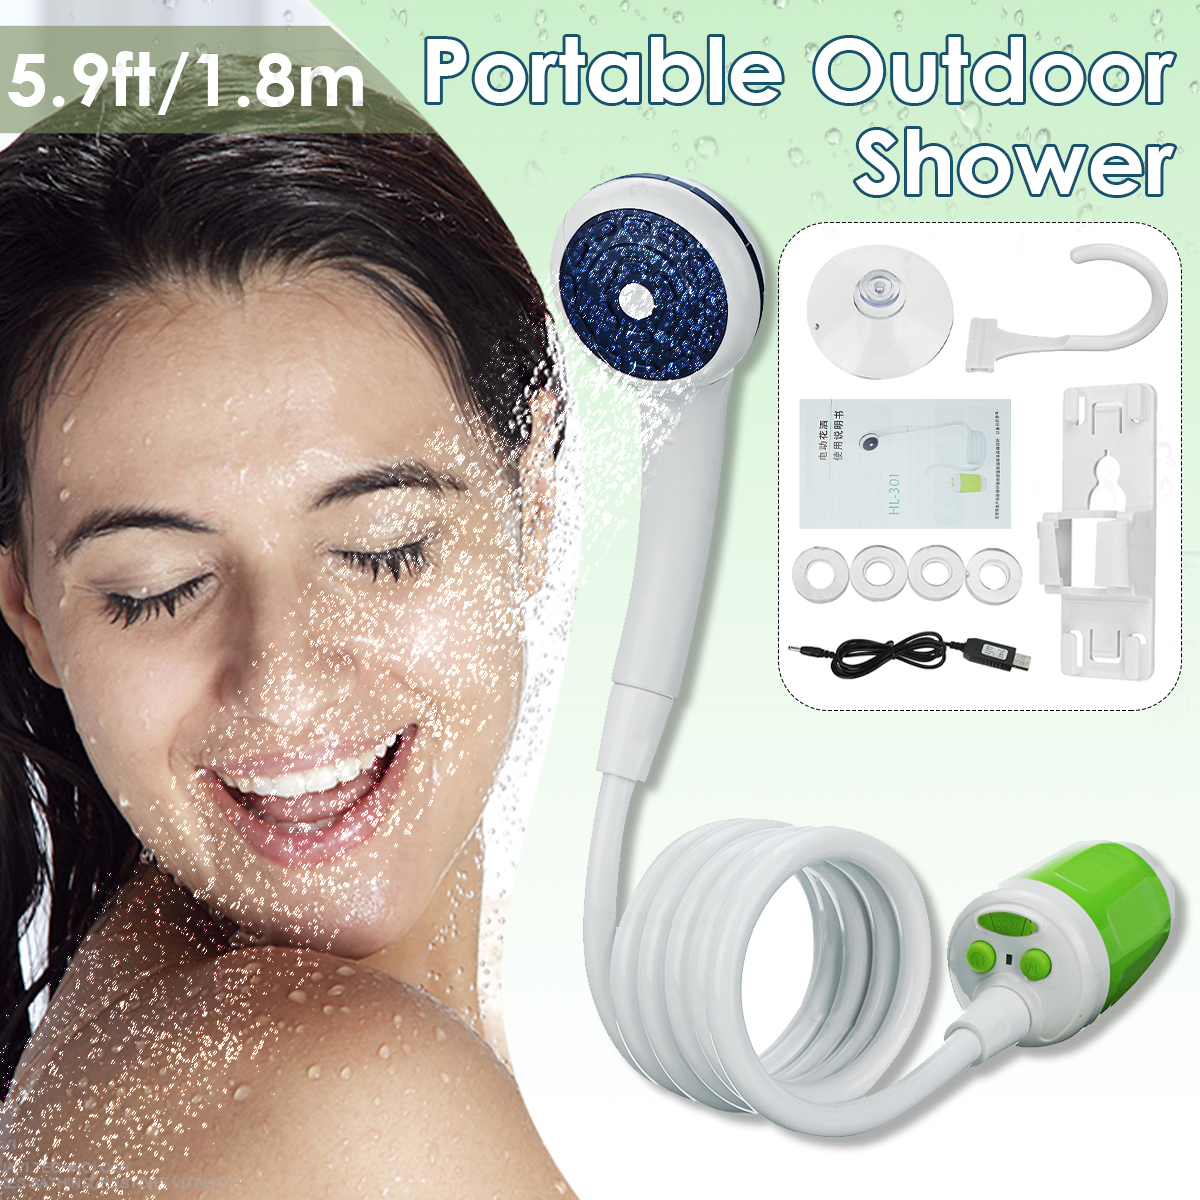 Electric-Outdoor-Shower-Kit-Camping-Shower-With-Electric-Pump-Shower-For-Travel-Car-Washing-Camping--1935369-1